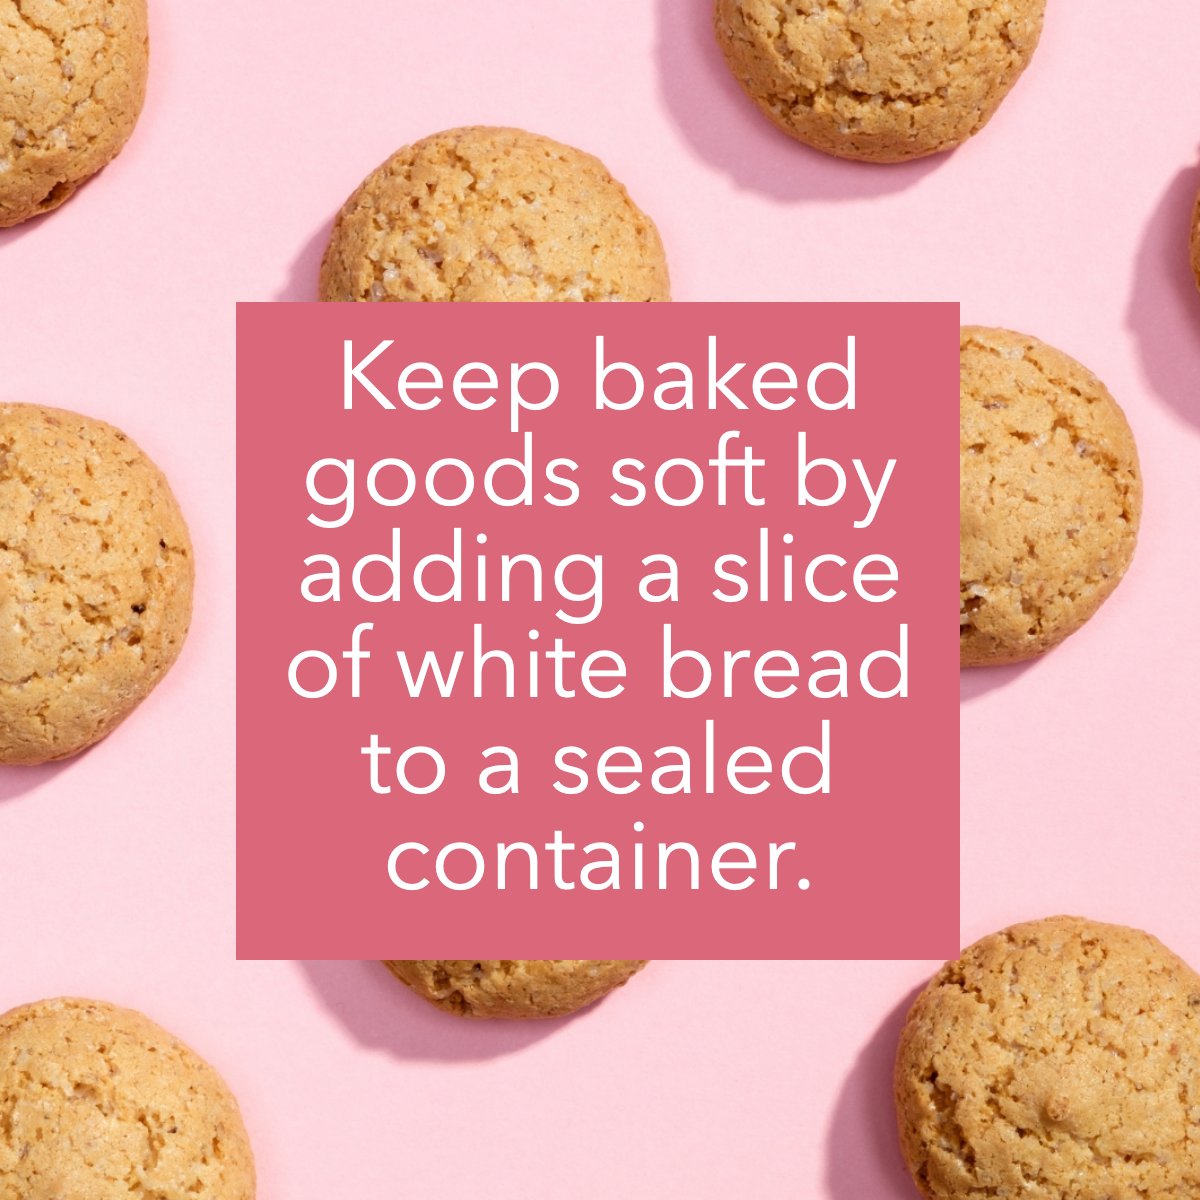 Ready for a #bakinghack?

Keep baked goods soft by adding a slice of white bread 🍞 to a sealed container.

What's the best kind of cookie 🍪? Let us know in the comments!

#cookies #pink #baking #kitchenhack #funfact #bakingtips
 #southfloridarealestate